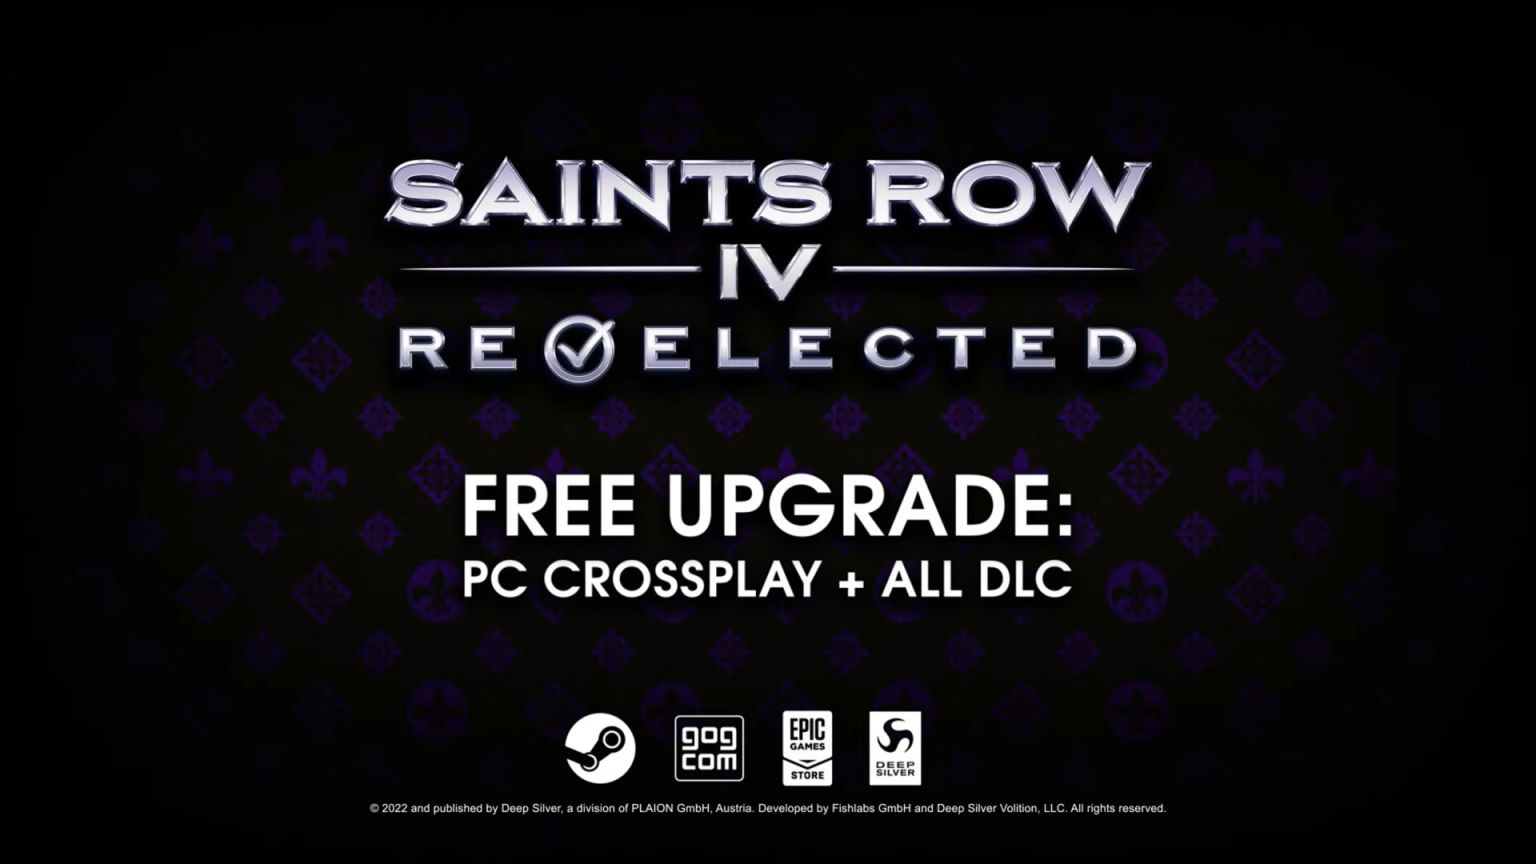 saints row iv re elected update 2022